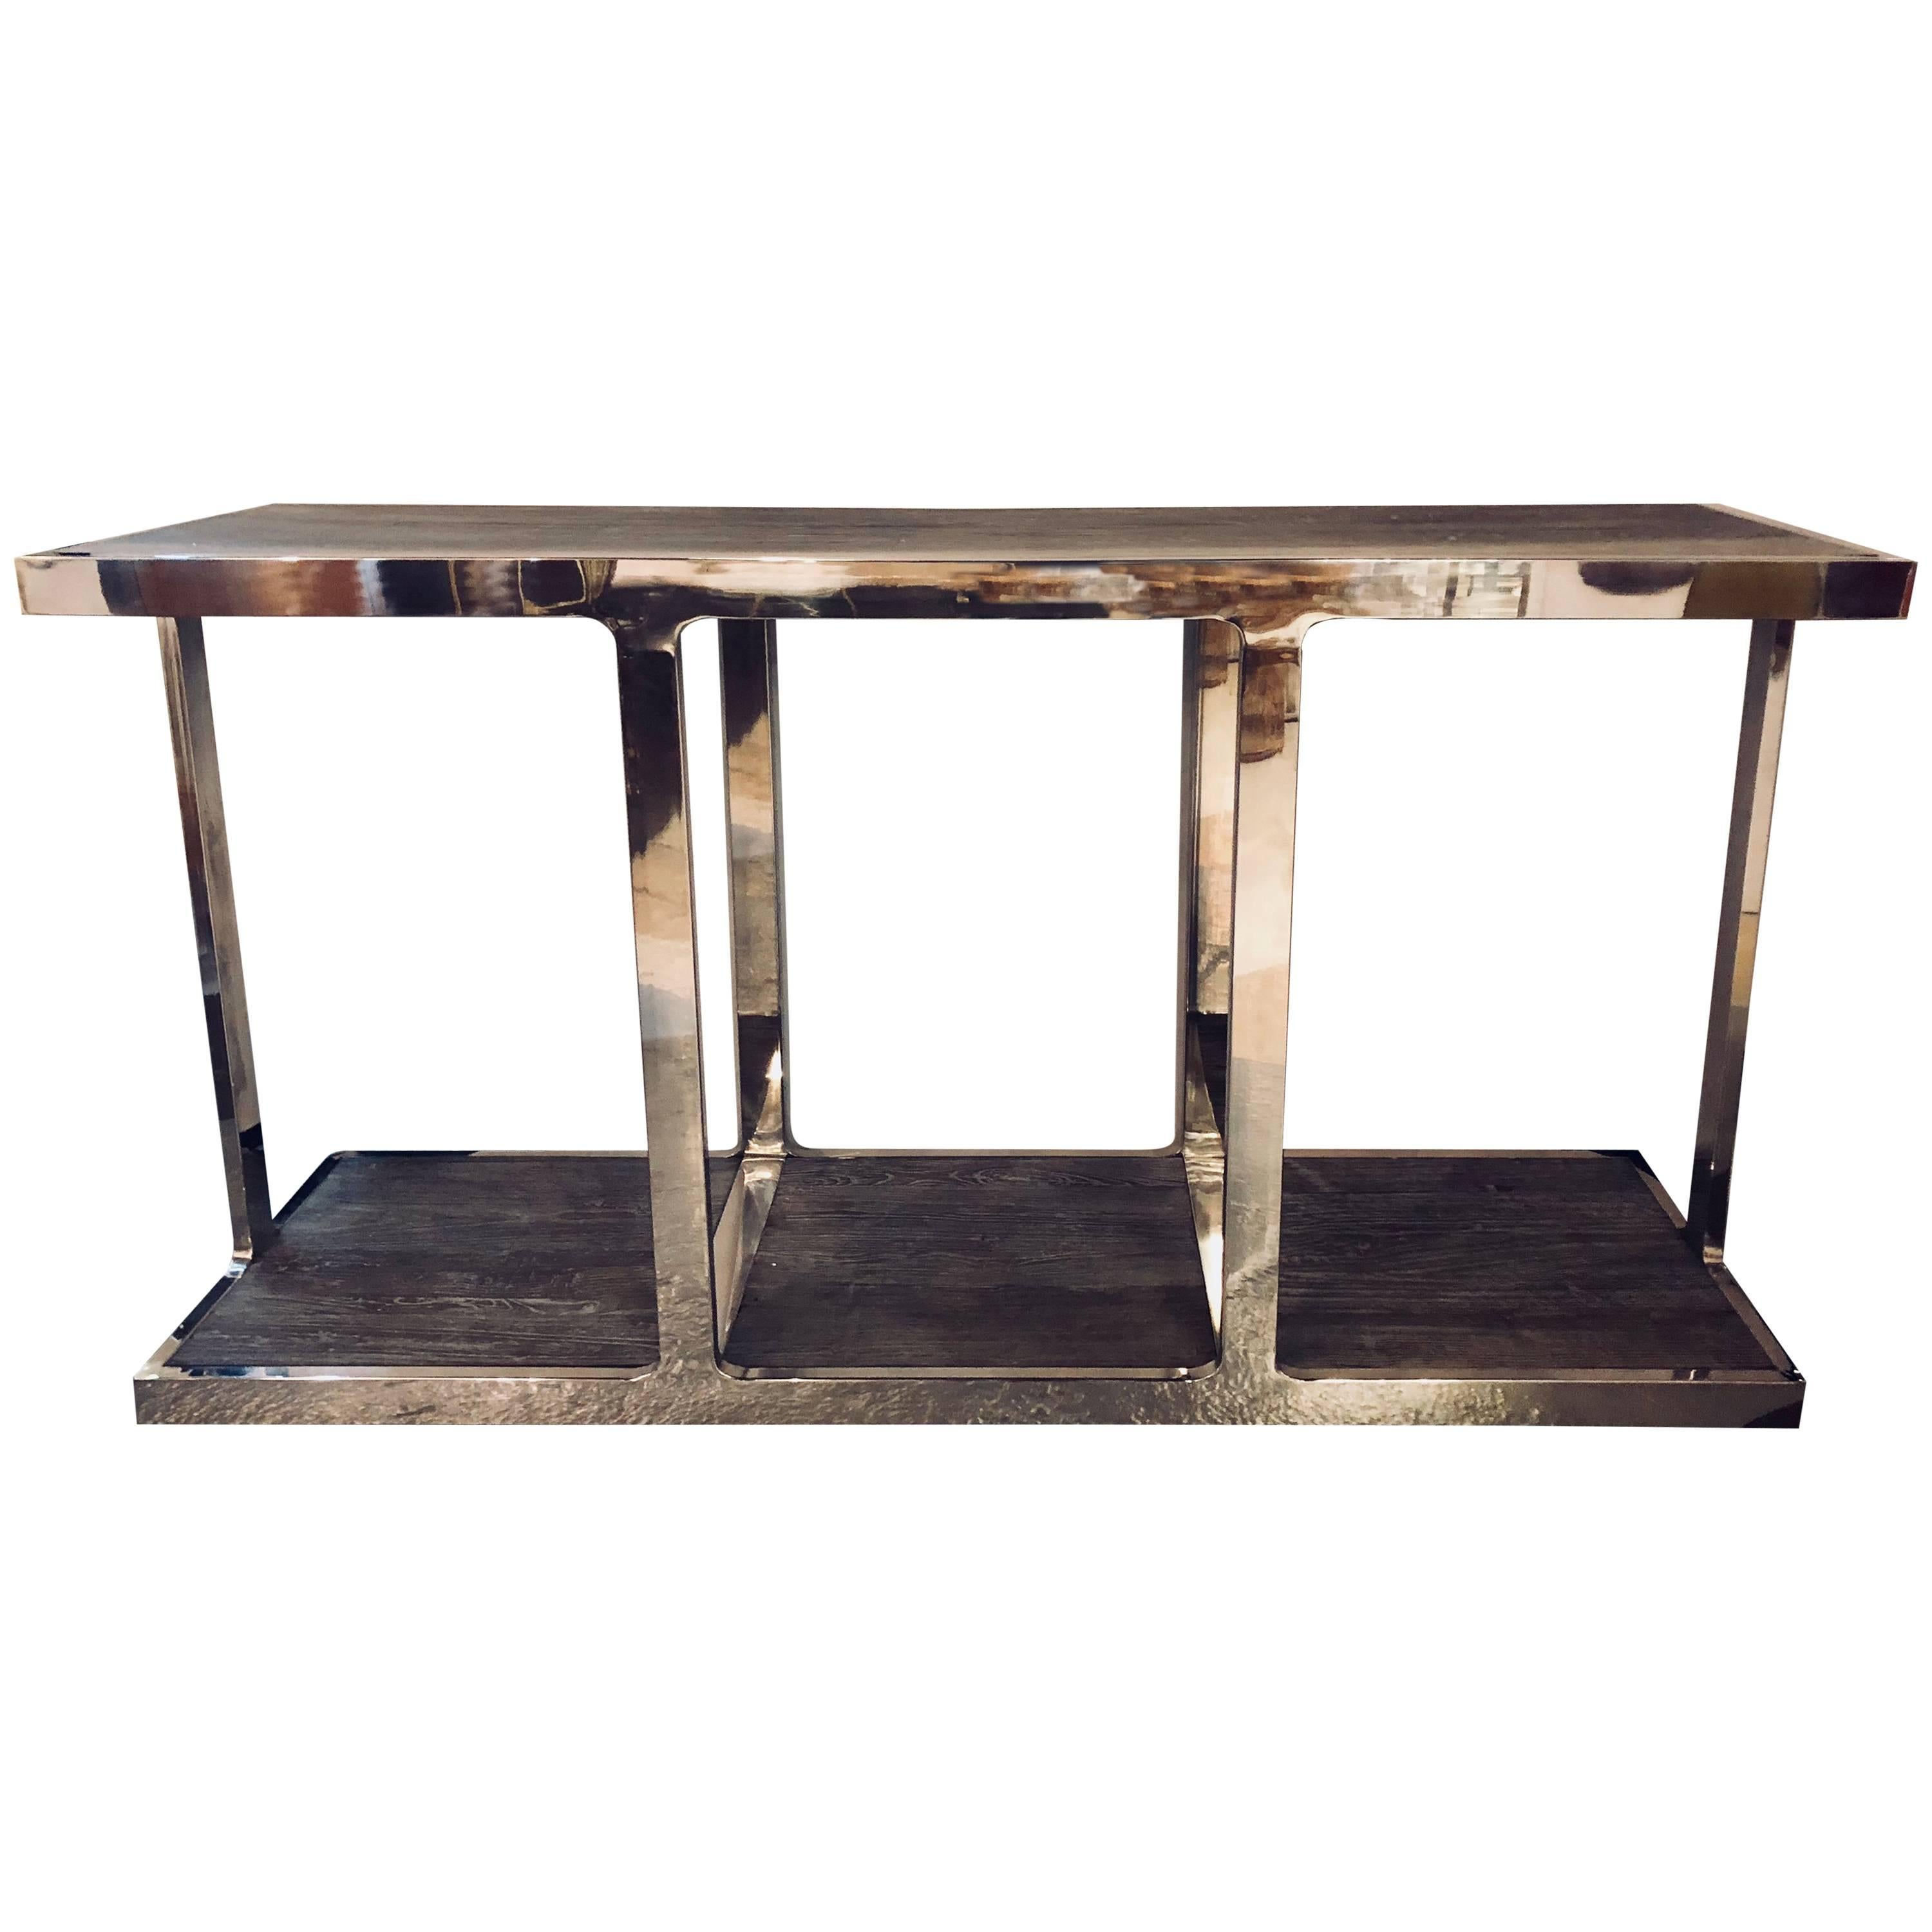 Modern Chrome and Distressed Wood Console/Sofa Table